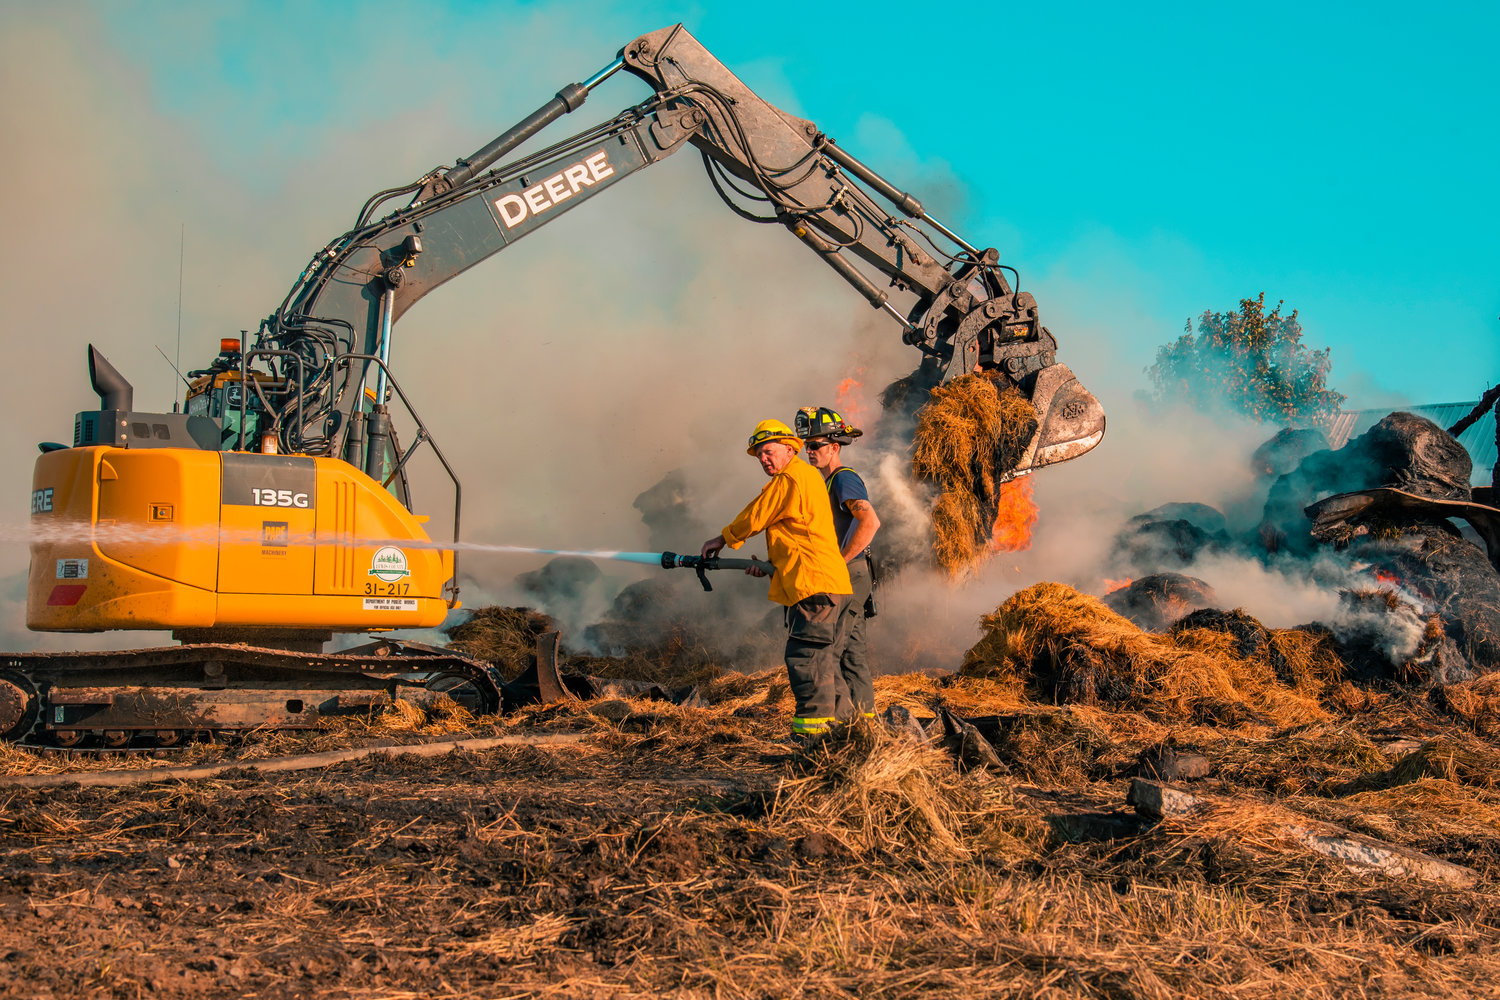 Firefighters use hoses to extinguish hot spots as an excavator lifts flaming bales of hay from remnants of a structure following a fire in Napavine.